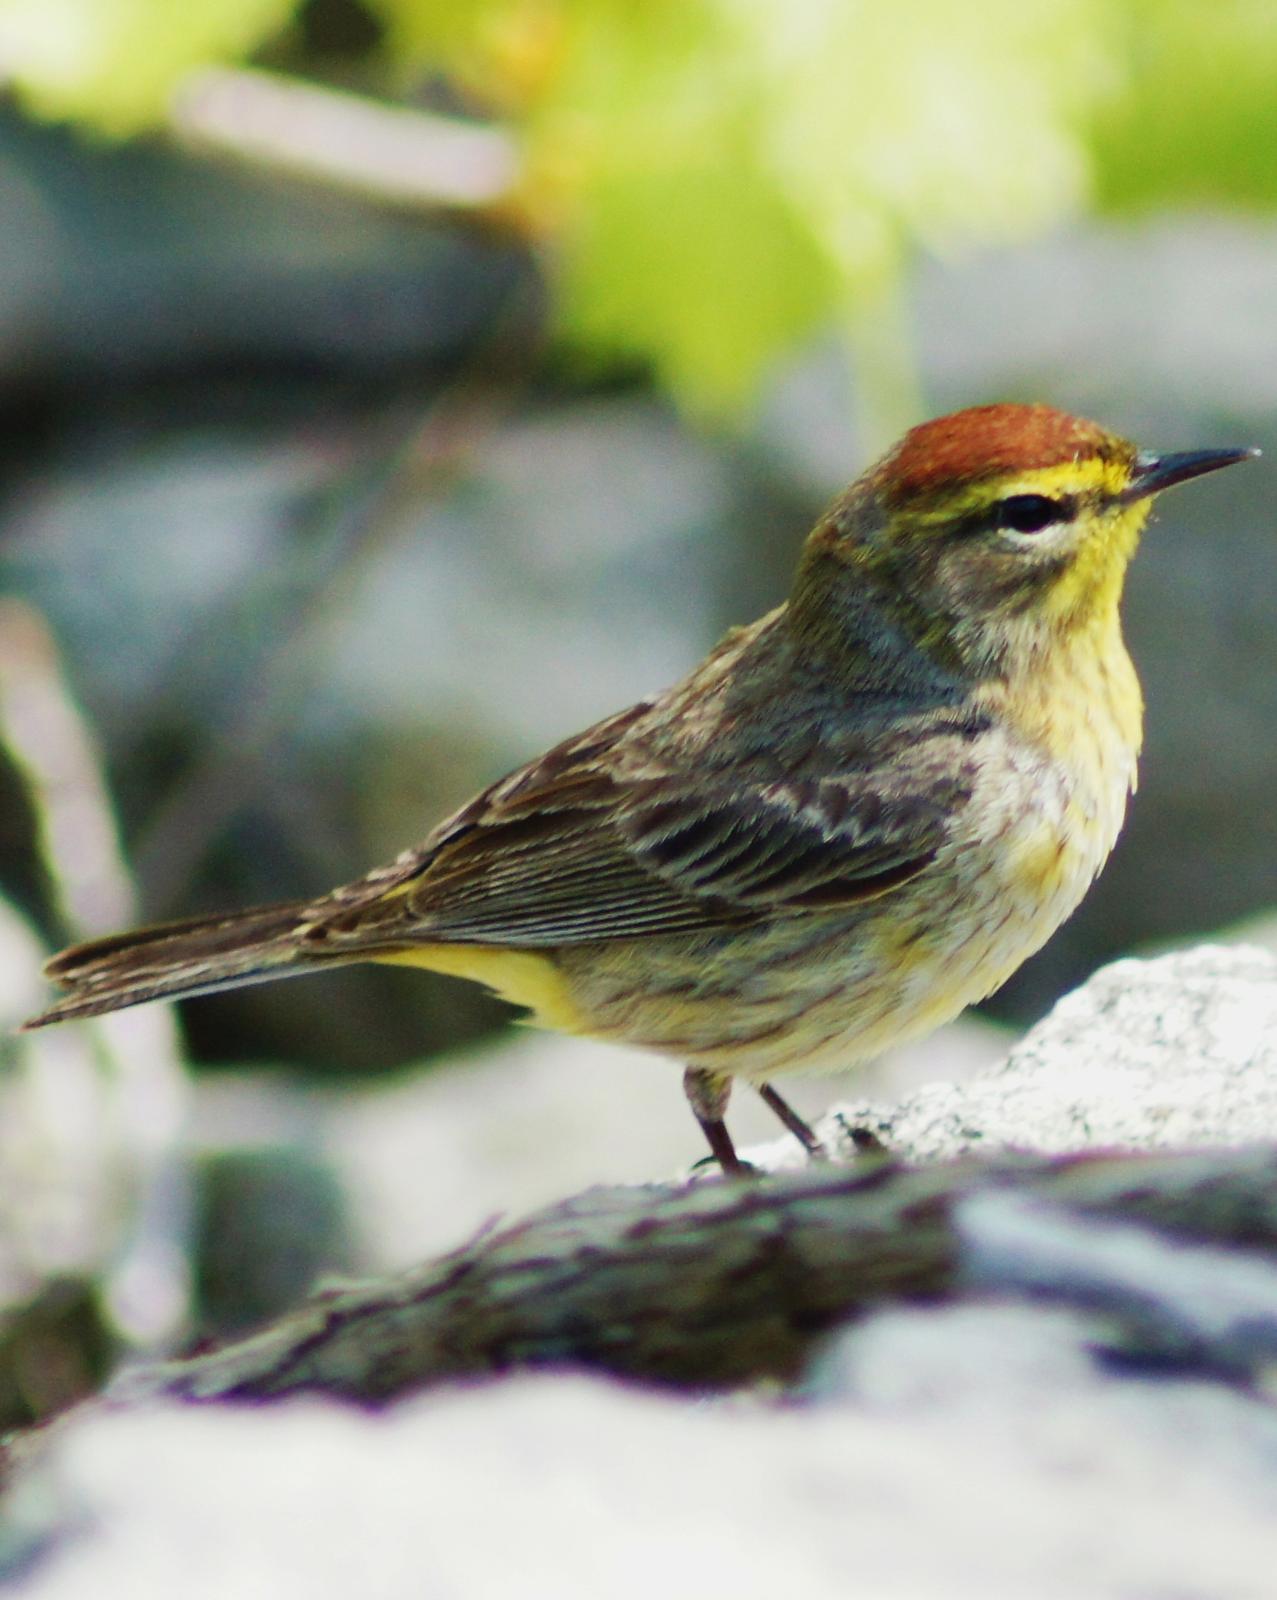 Palm Warbler Photo by Nathan DeBruine